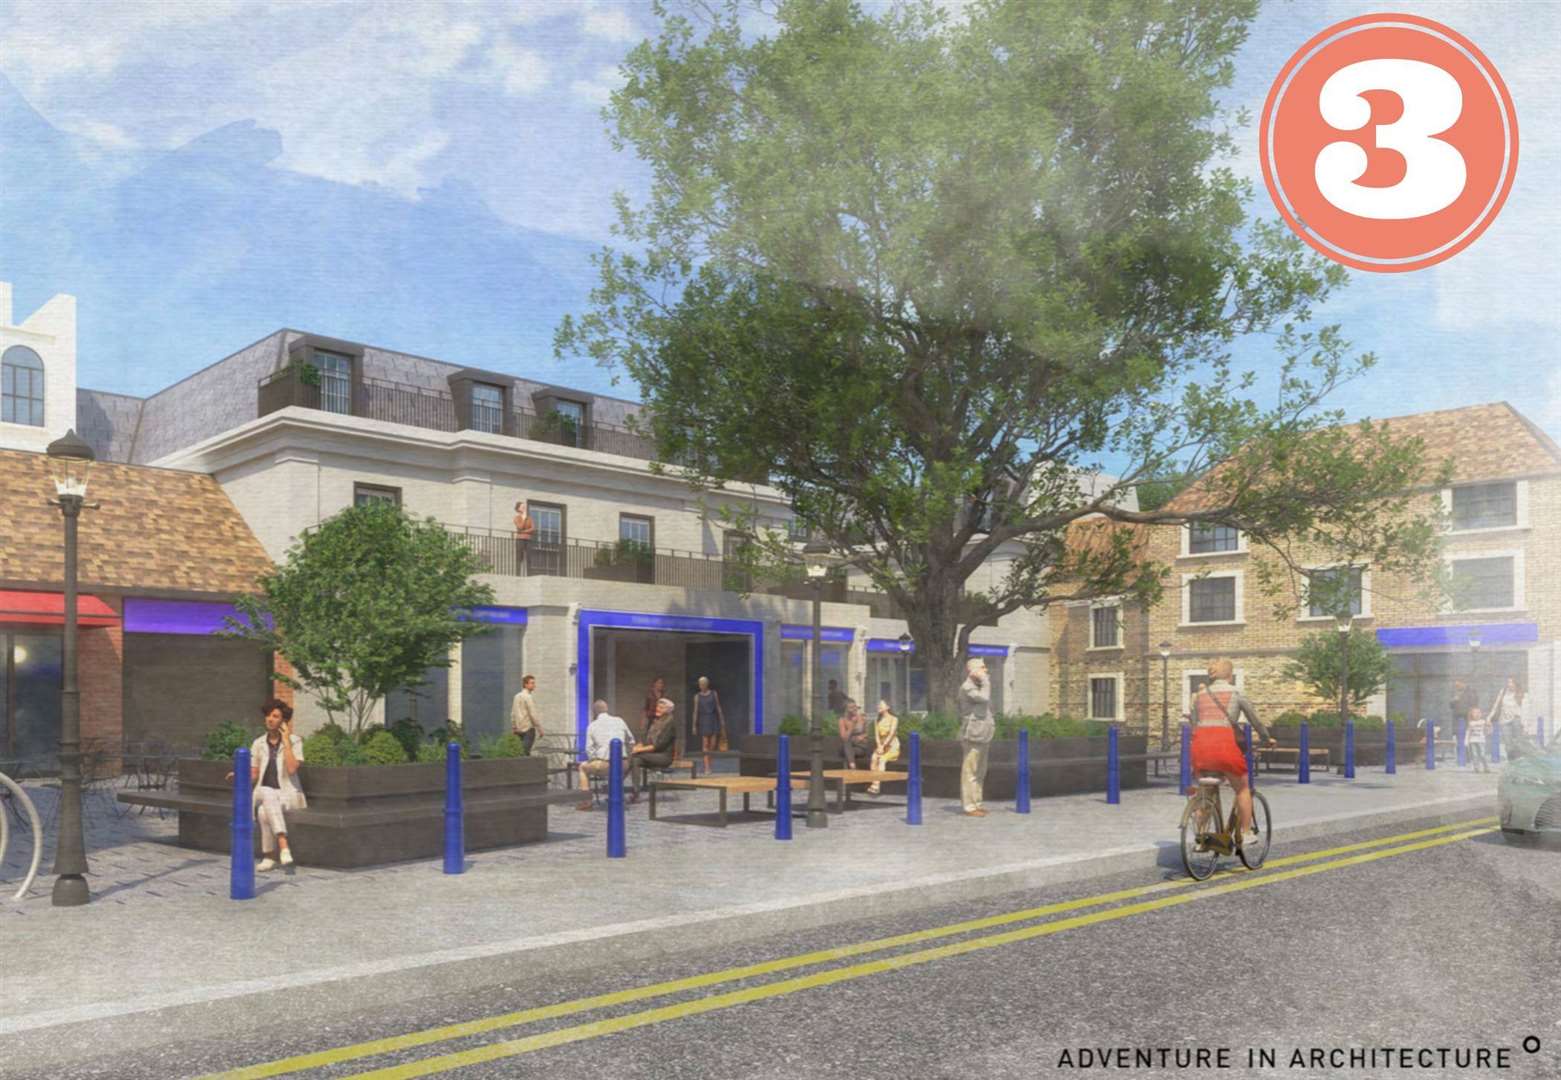 The latest - and third - proposals were unveiled this month, showing a drastically different frontage to Hythe High Street. Pic: Adventure in Architecture